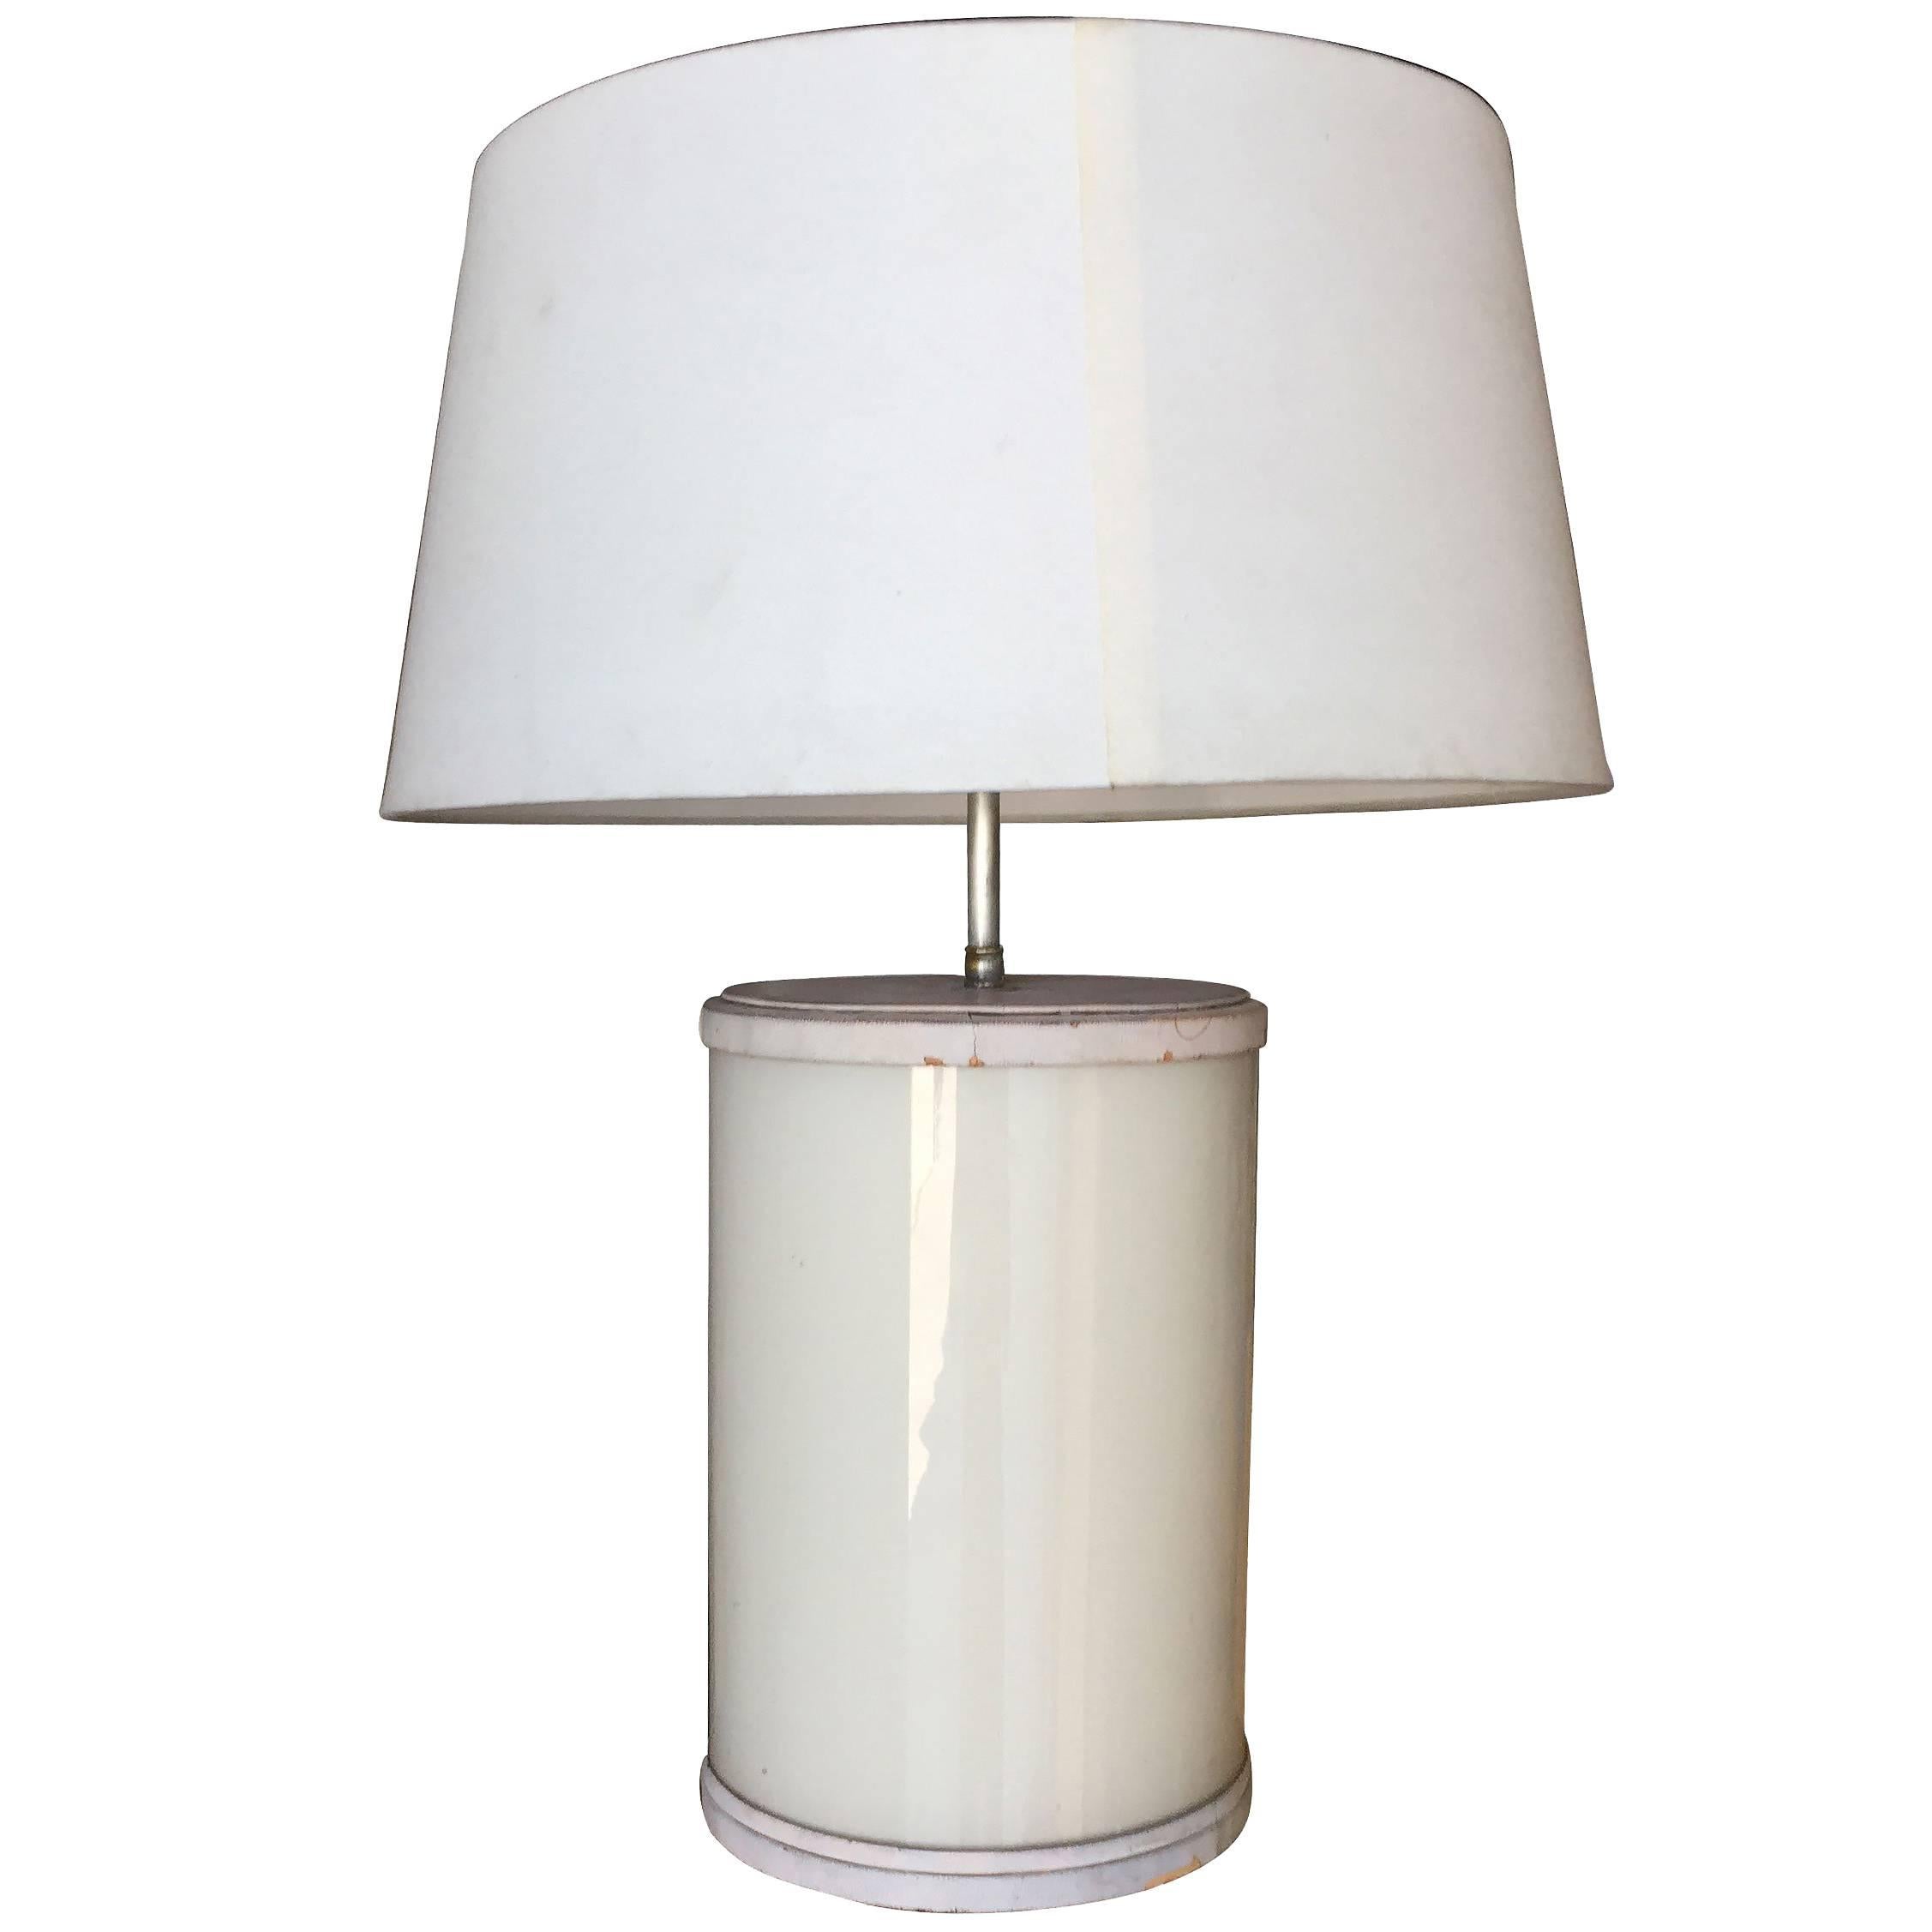 Paul Frankl Custom White glass and Leather Table Lamp